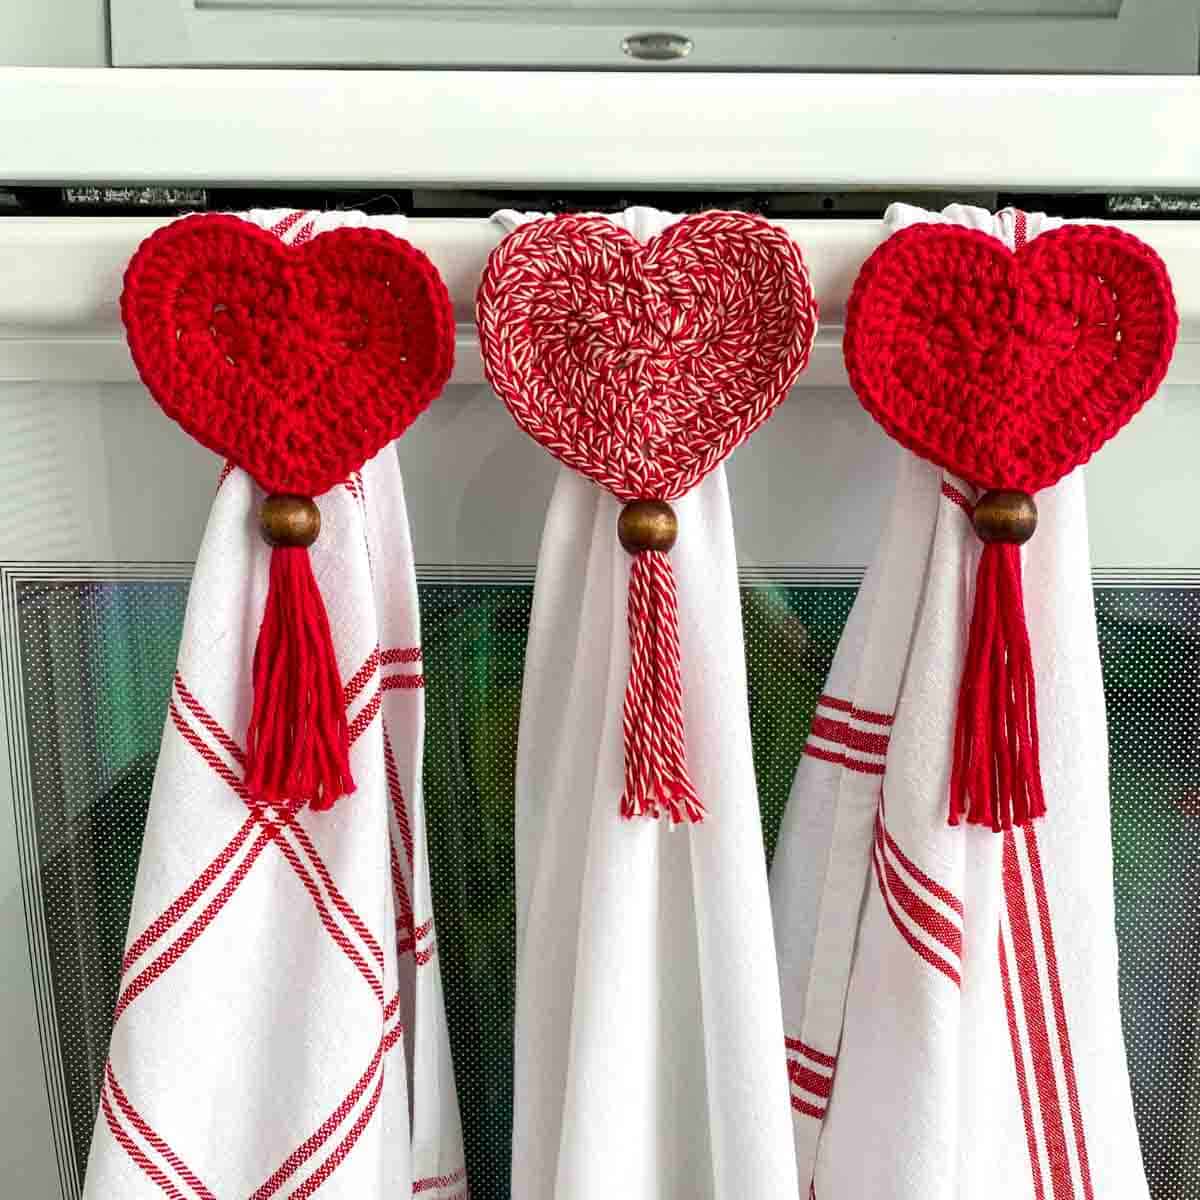 3 crochet heart towel toppers hanging 3 red and white towels on a stove handle